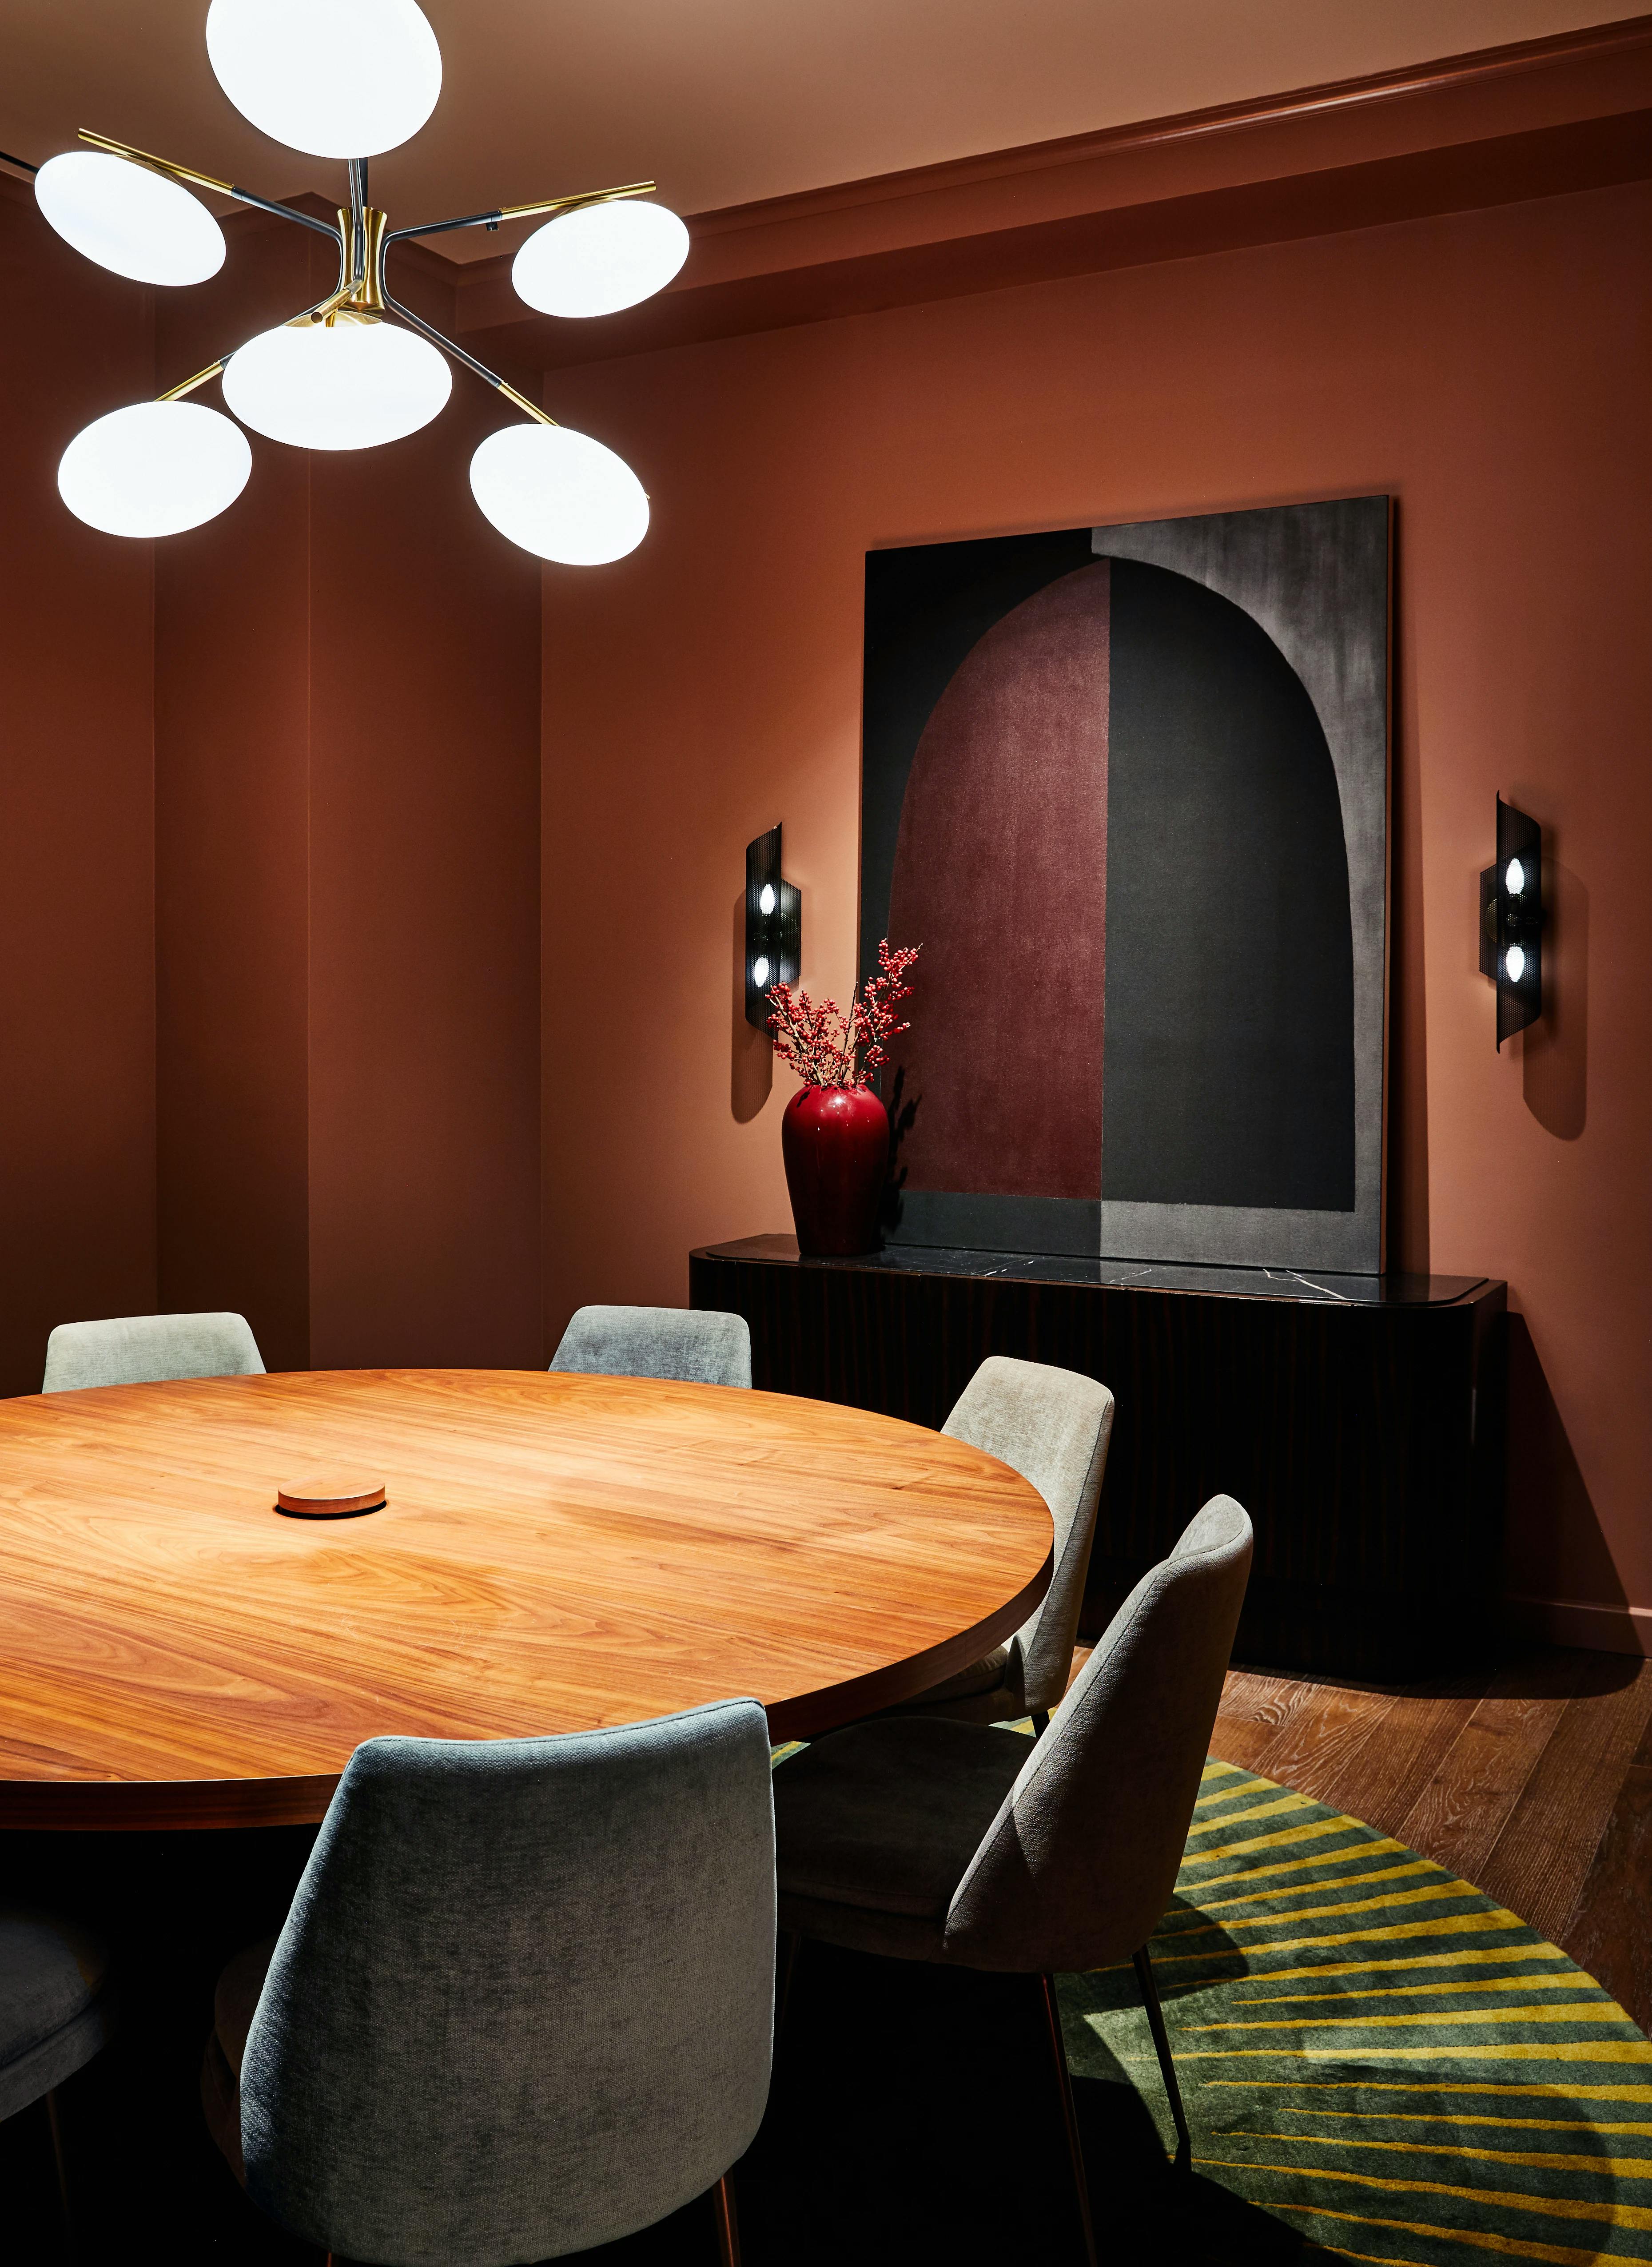 A conference room at the Chief Flatiron Clubhouse with a circular wooden table and a geometric red and black painting with an arch by artist Aschely Vaughan Cone installed on a red wall.